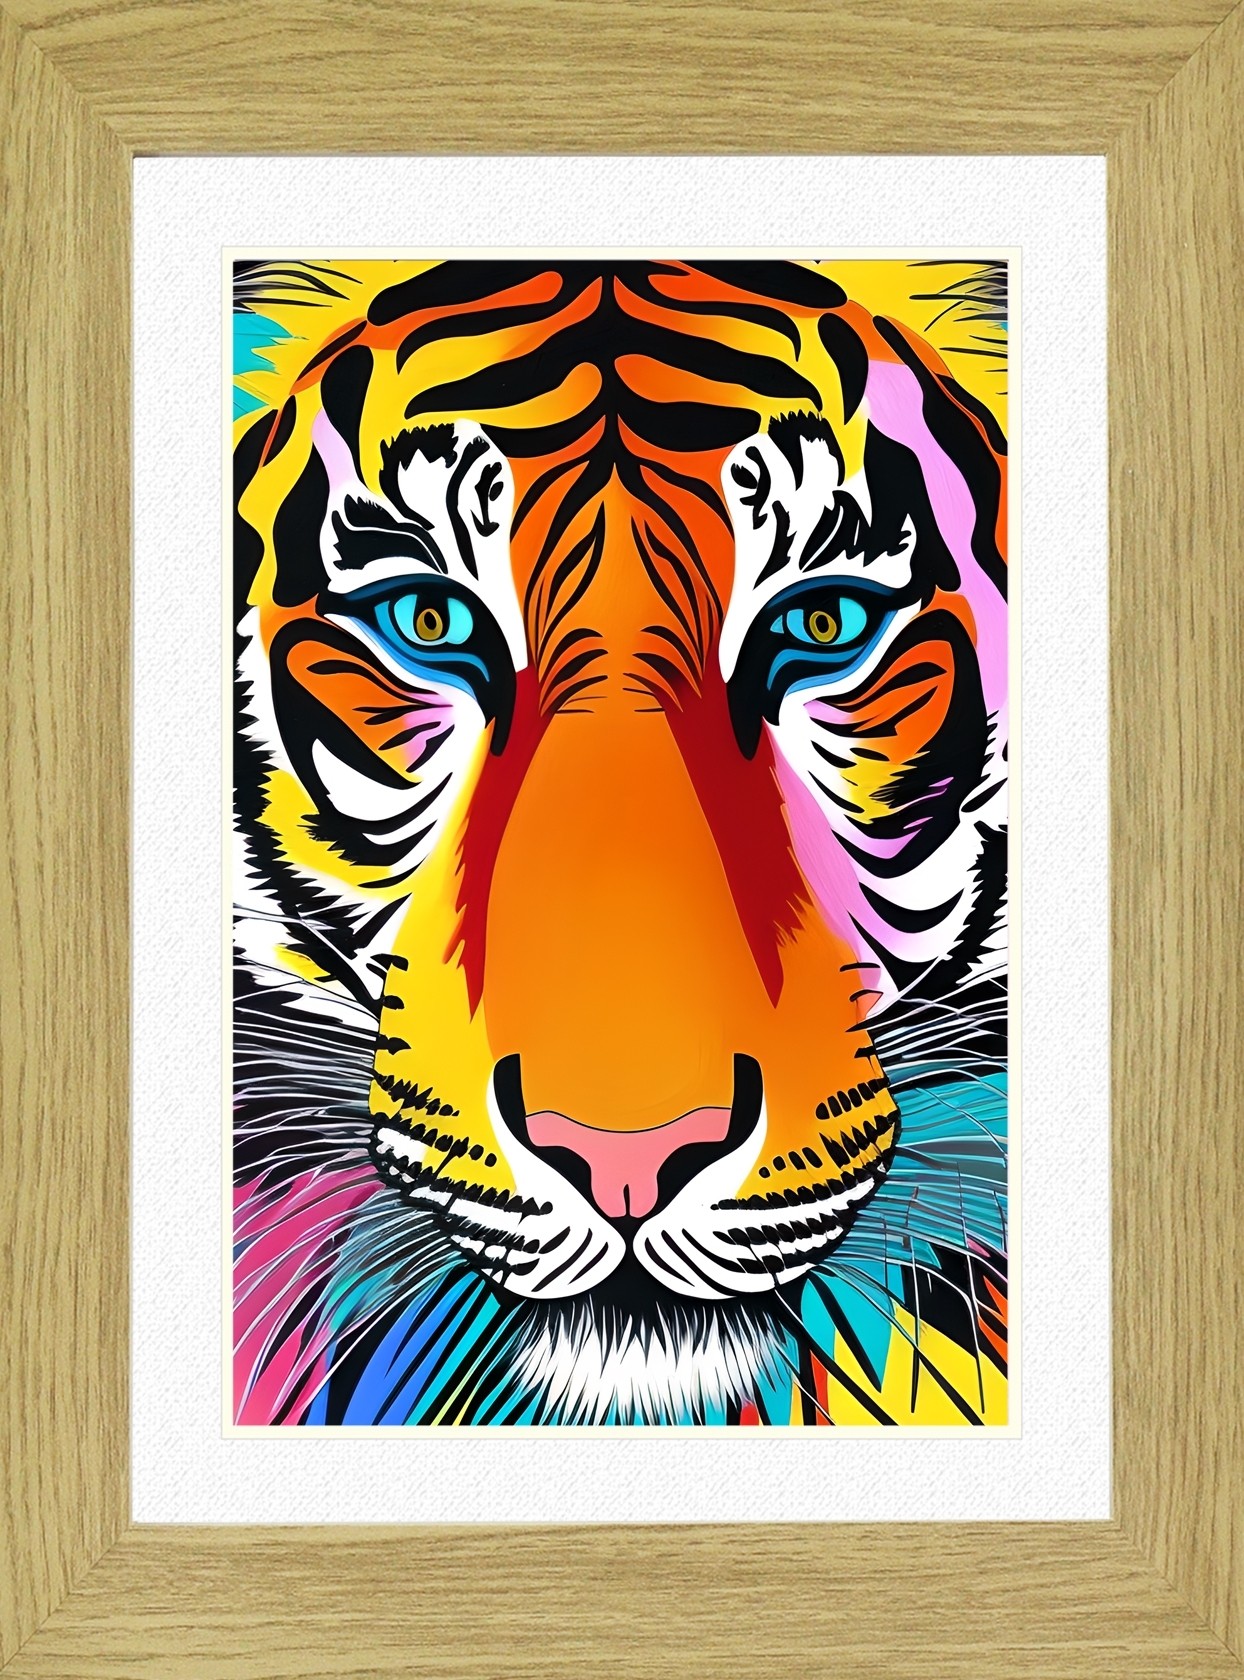 Tiger Animal Picture Framed Colourful Abstract Art (A4 Light Oak Frame)